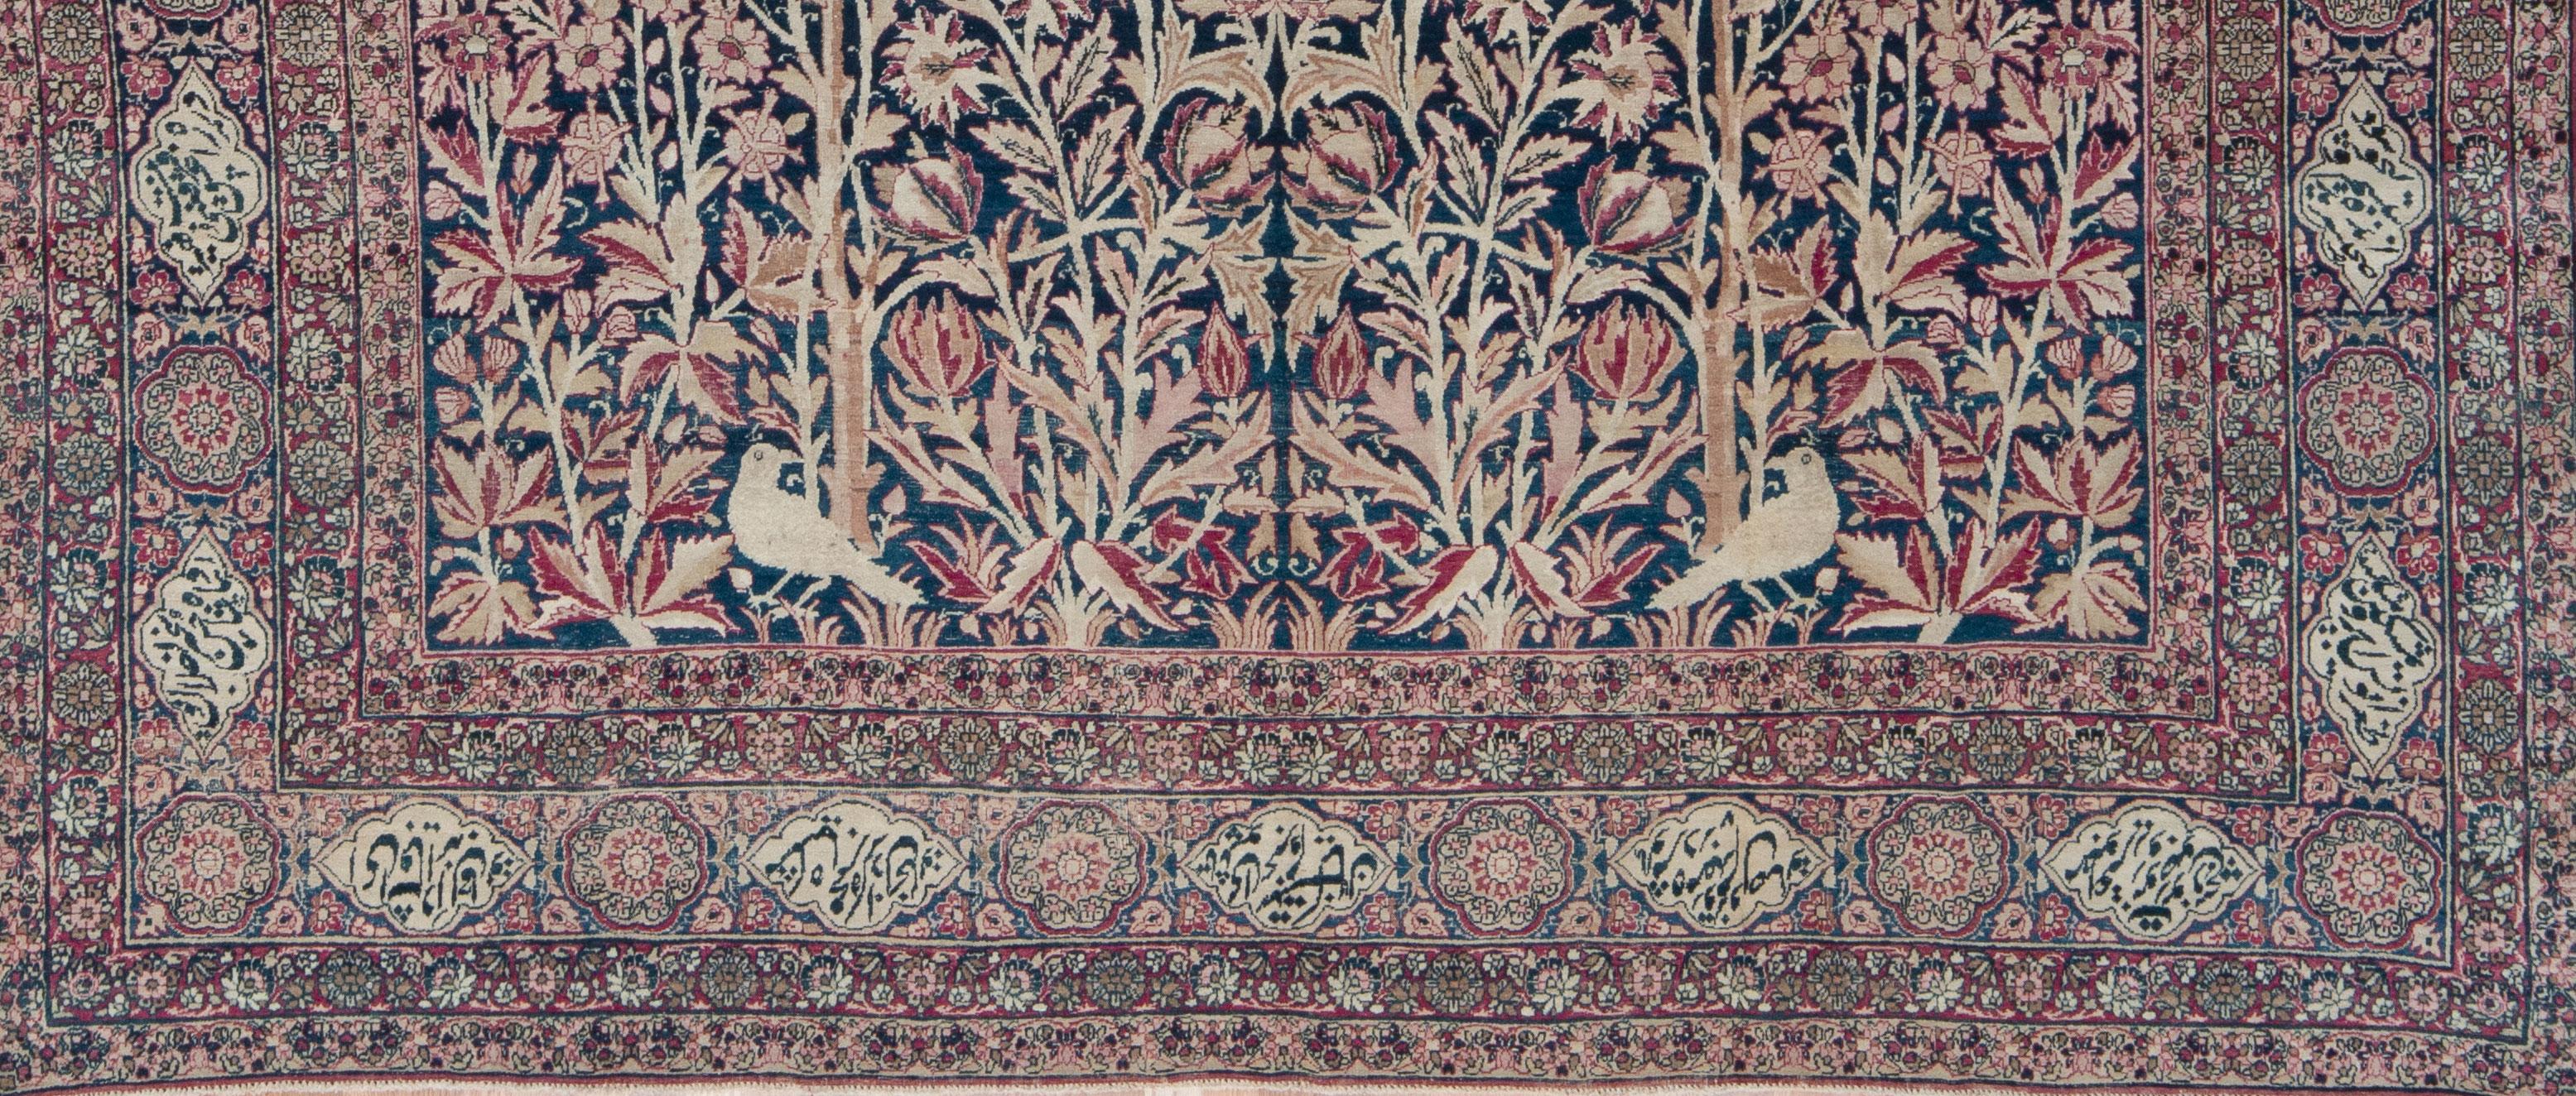 Antique Persian Lavar Botanical Rug, late 19th Century  For Sale 1